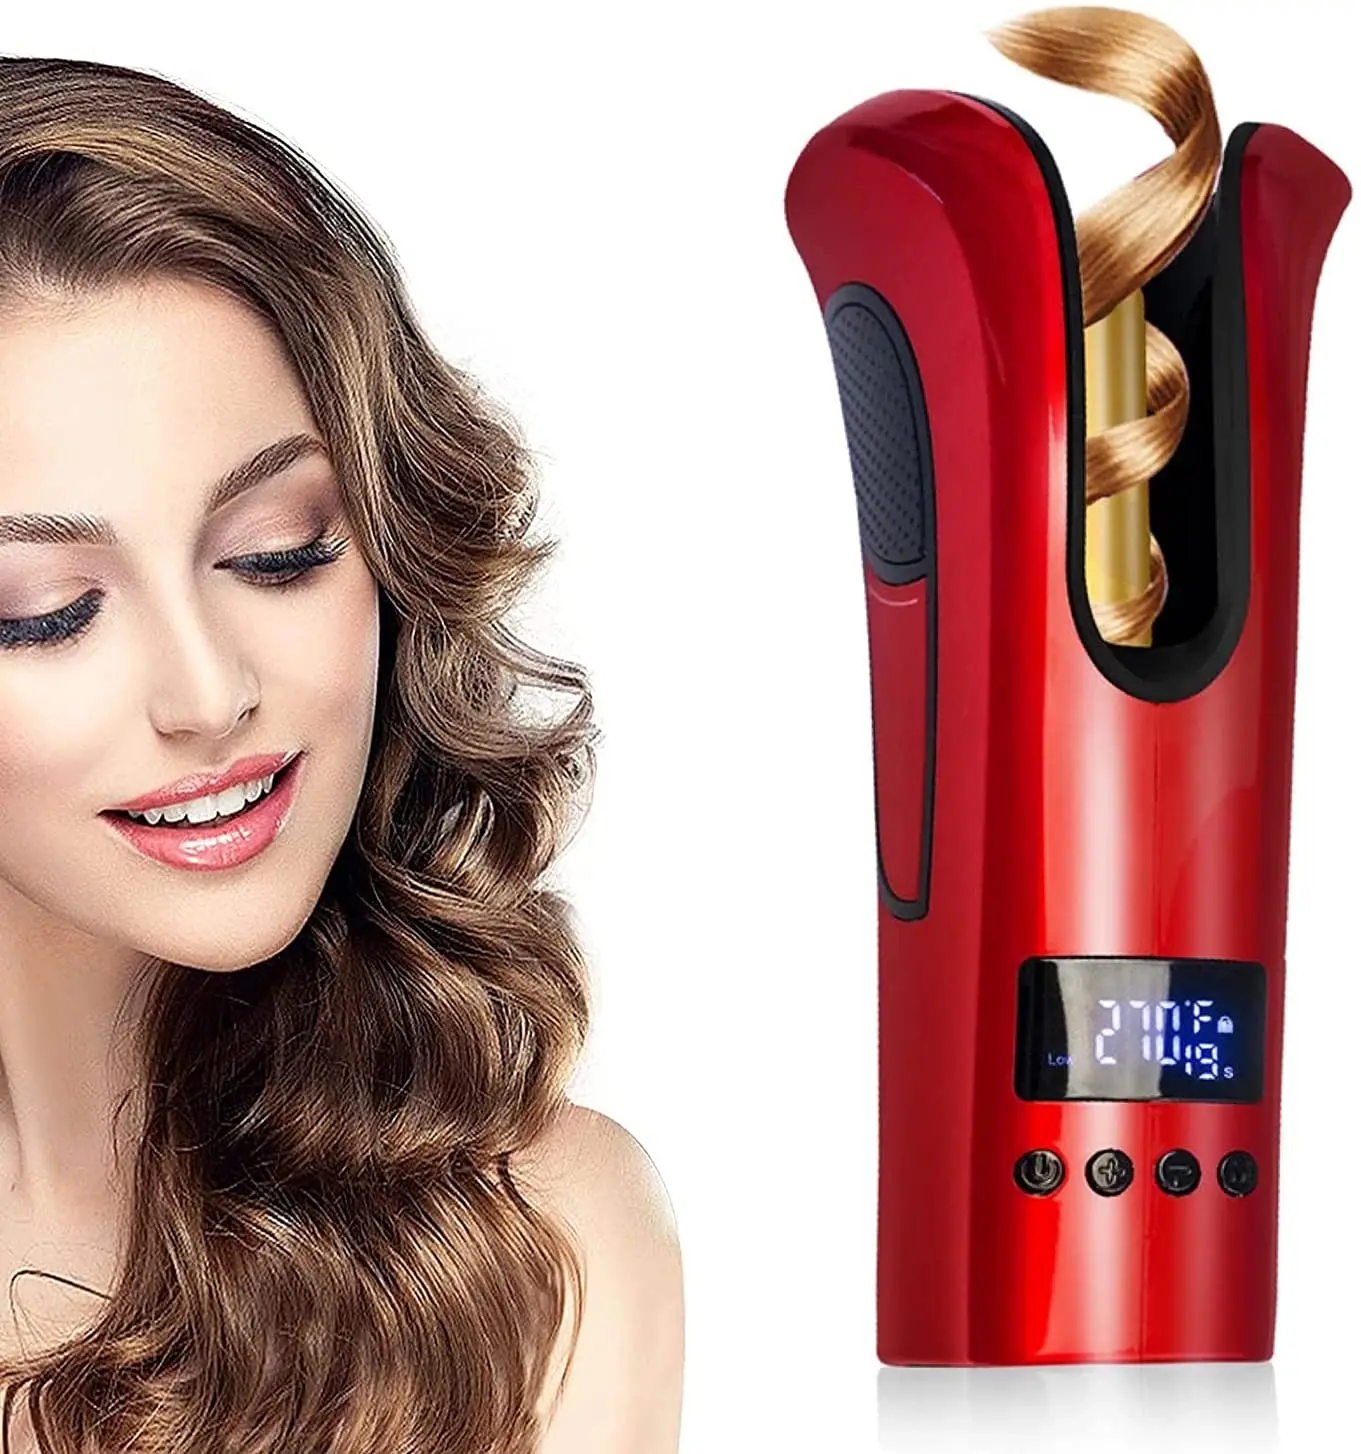 

Automatic Curling Iron, Hair Curler Ceramic Heater Auto Rotating Cord Anti frizz Suit Digital LCD Display Curly Wave Styling